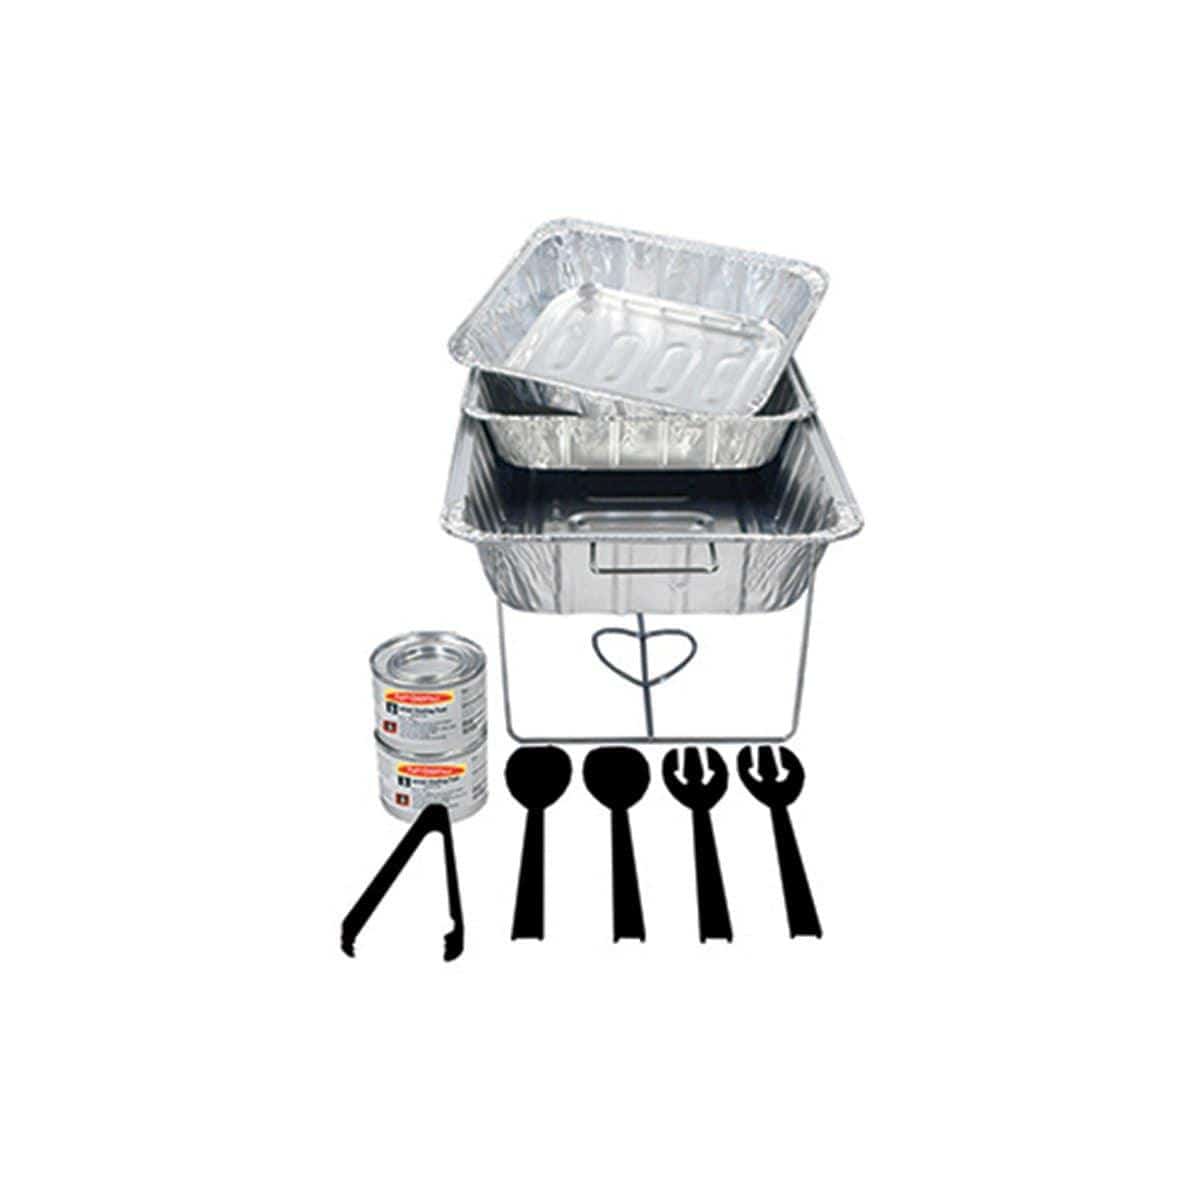 Buy Plasticware Party Kit, 11 Count sold at Party Expert